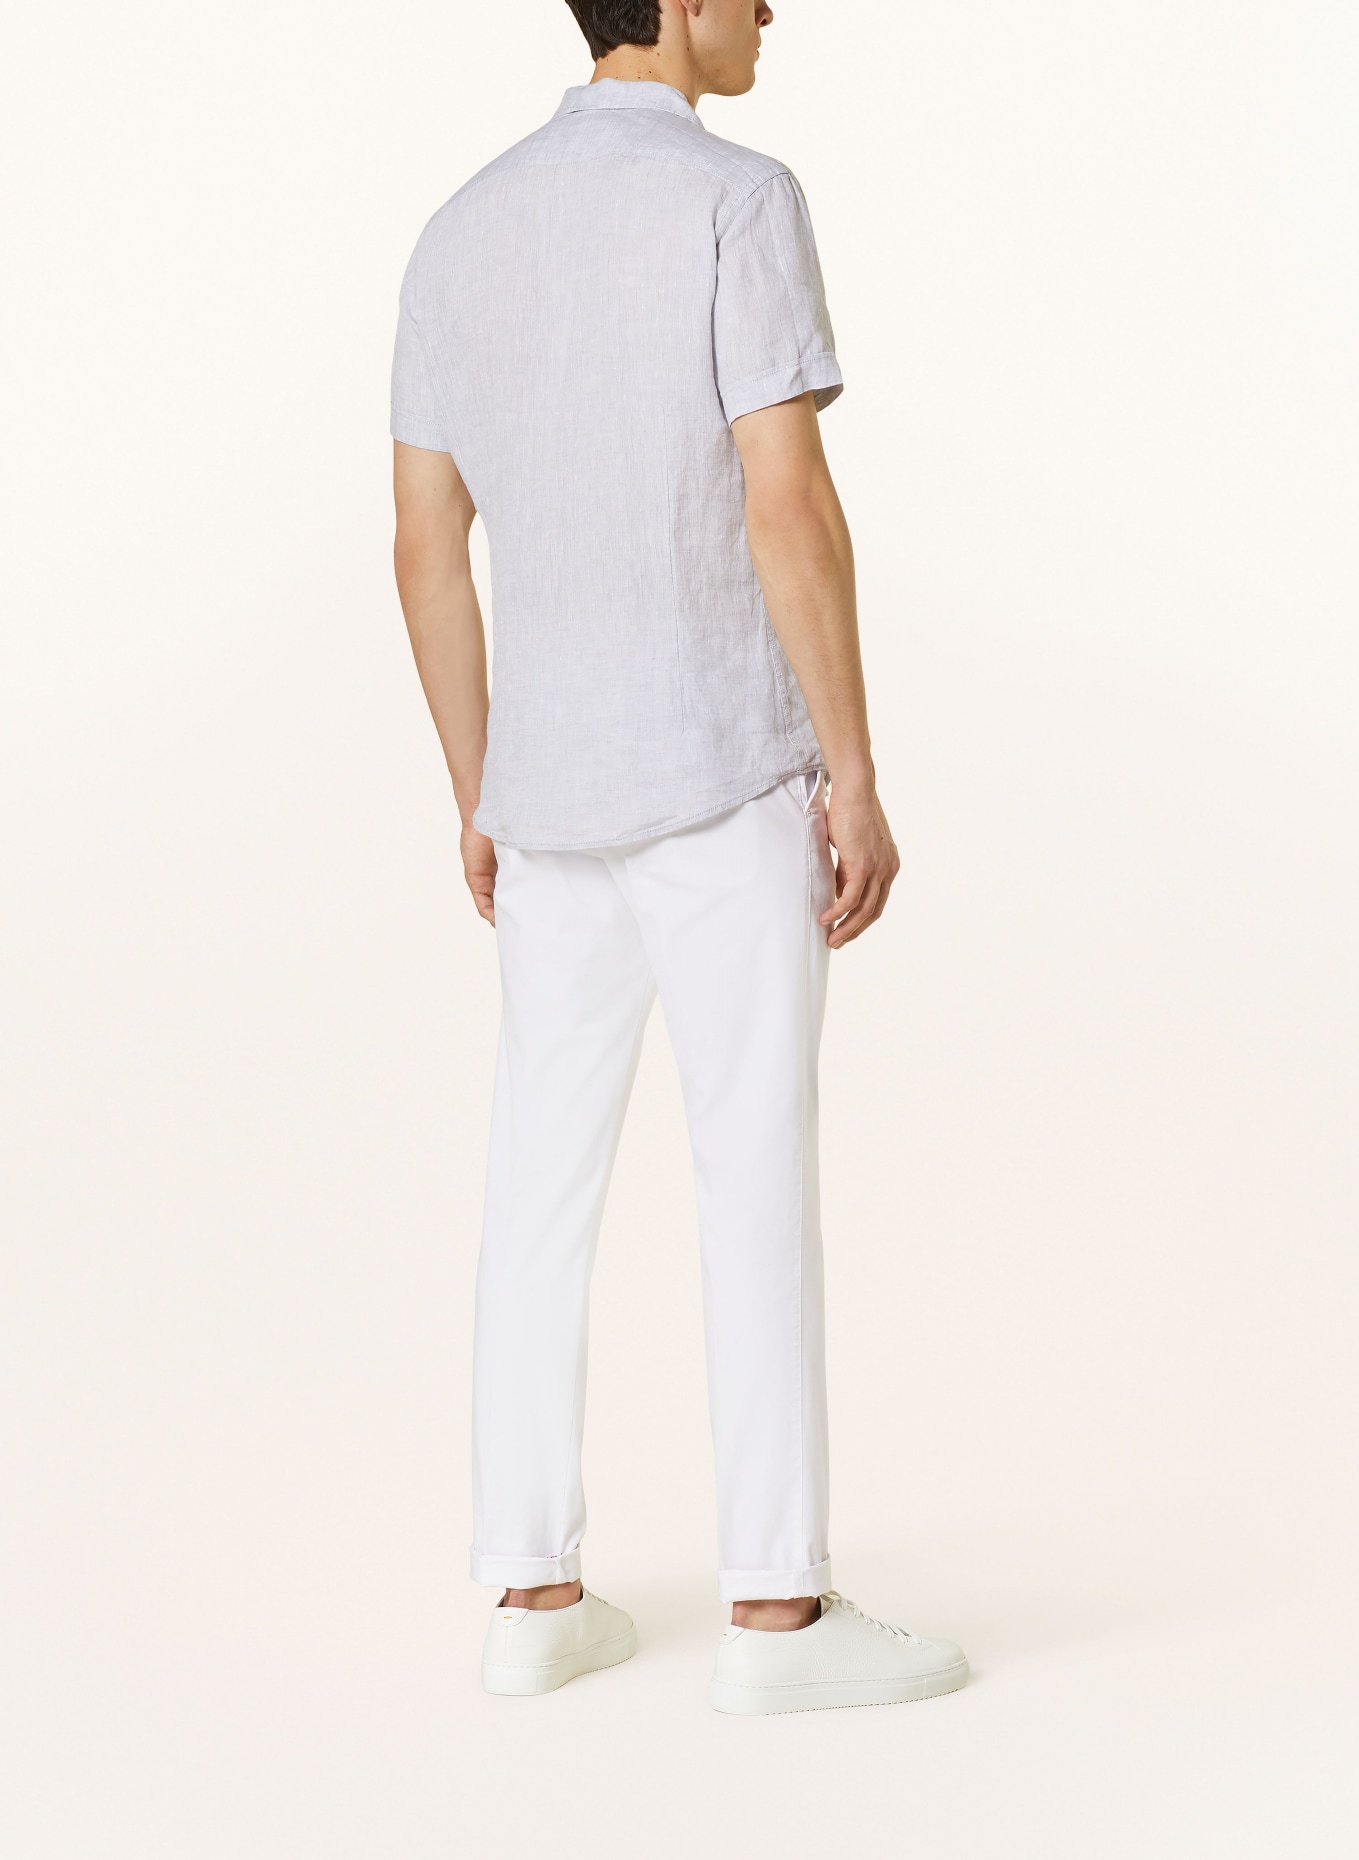 Q1 Manufaktur Resort shirt OLLY slim relaxed fit in linen, Color: GRAY (Image 3)